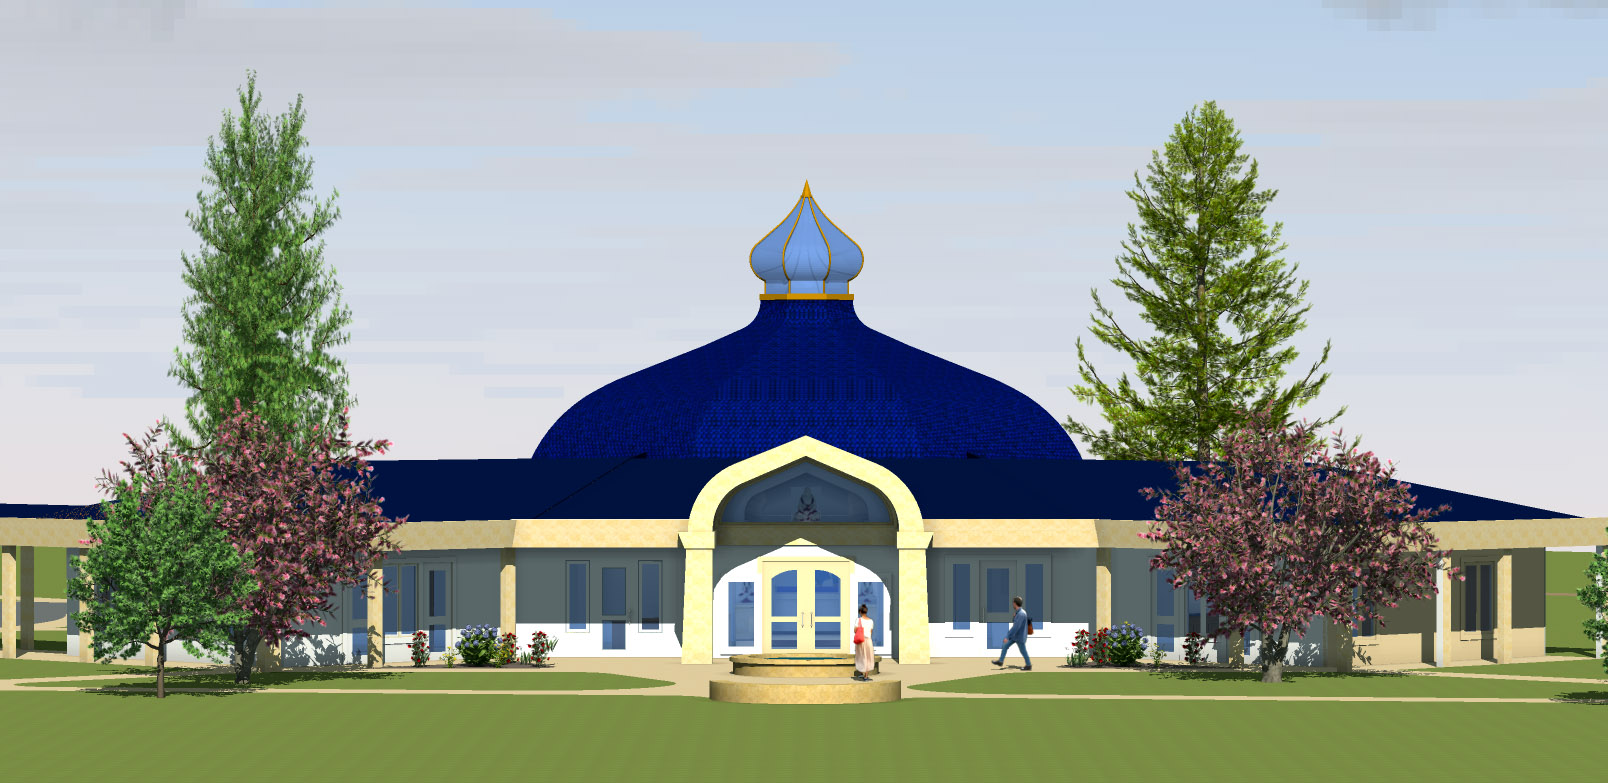 Photo rendering of the Temple of Light at Ananda Village